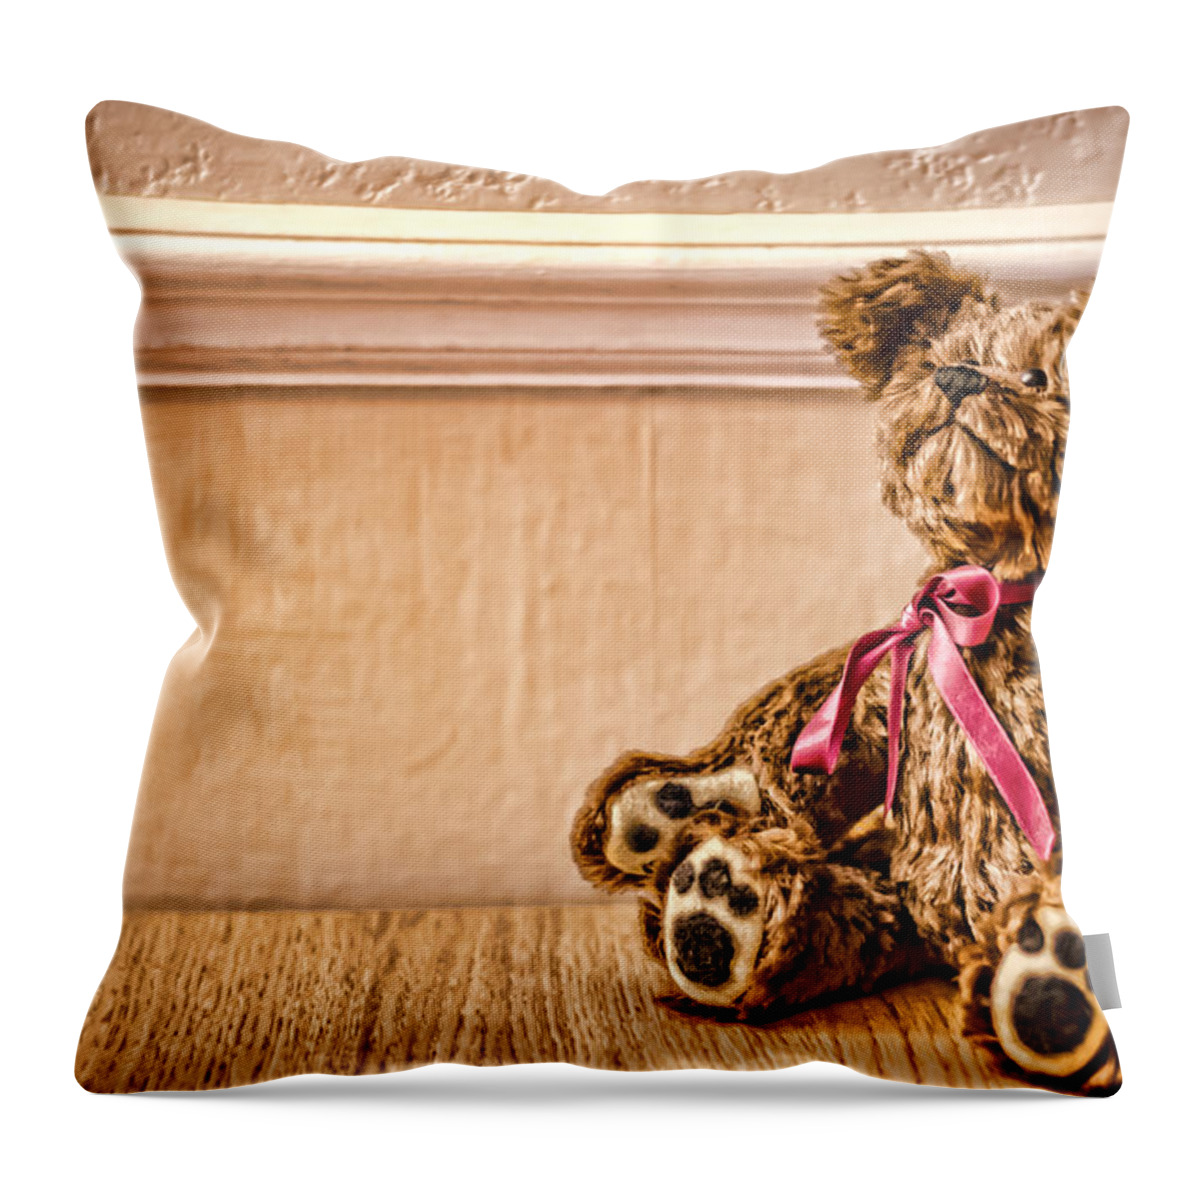 Teddy Bear Throw Pillow featuring the photograph Stuffed Friend by Heather Applegate